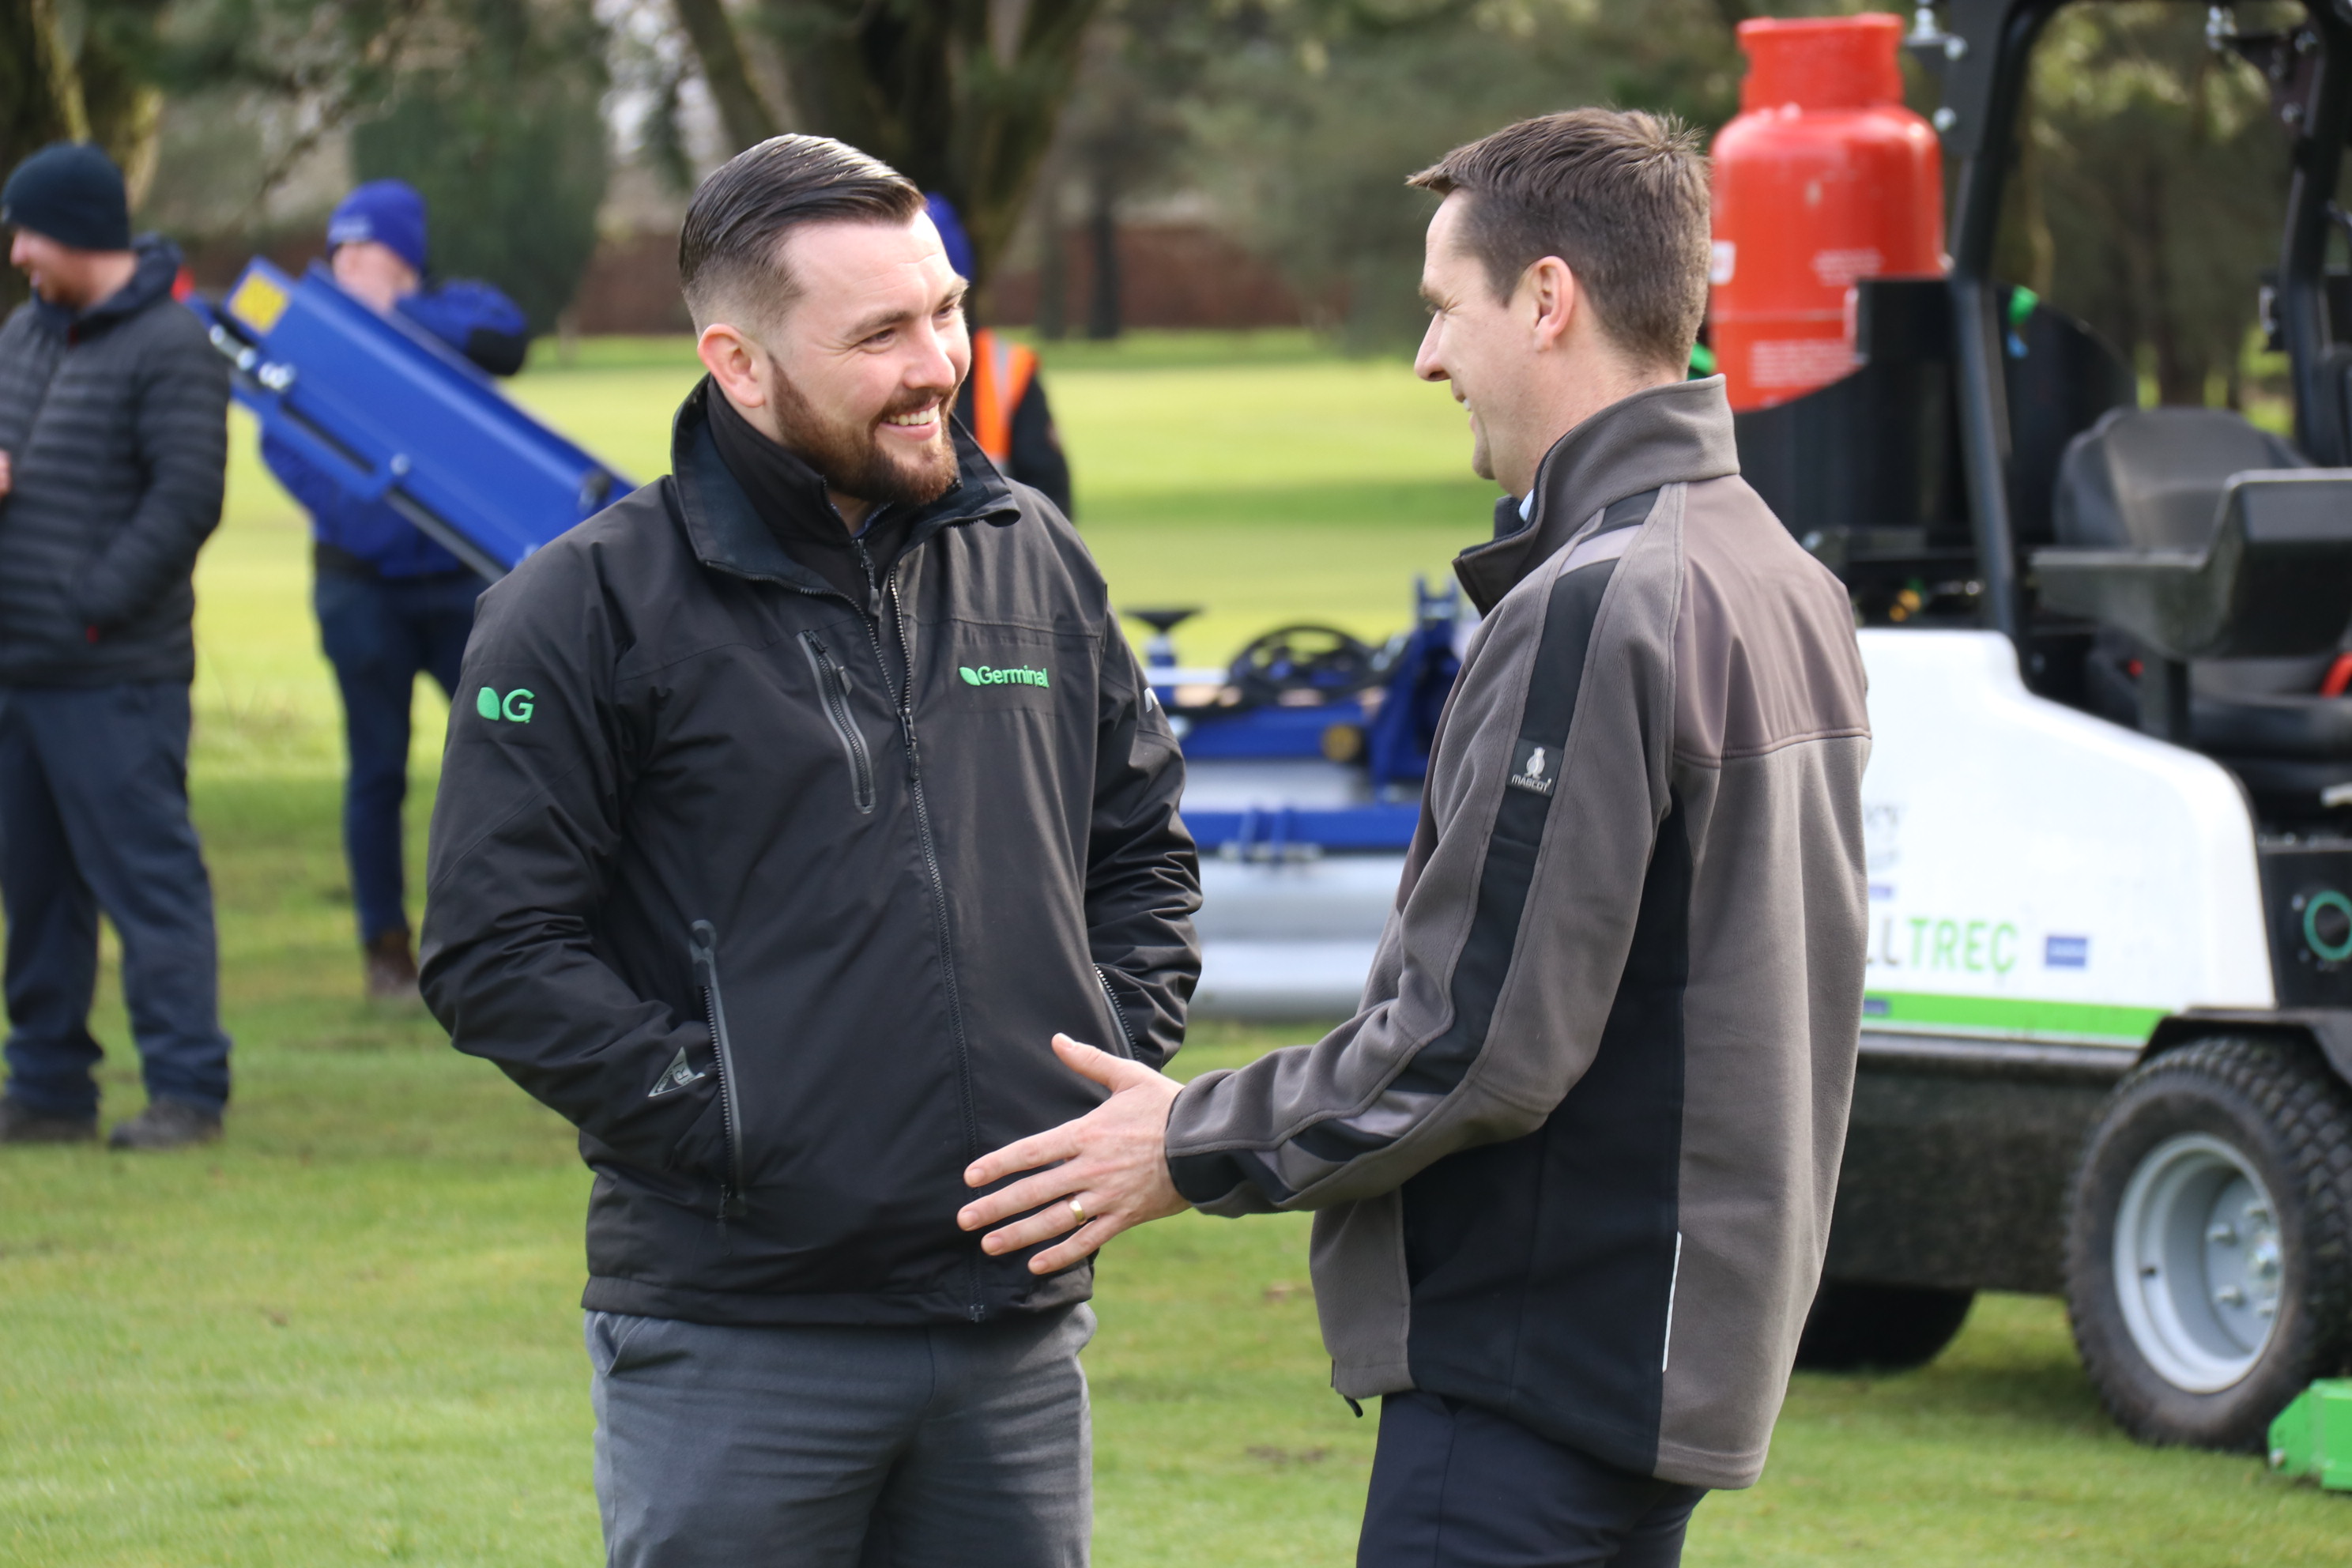 Scottish turfgrass demo day goes down a storm